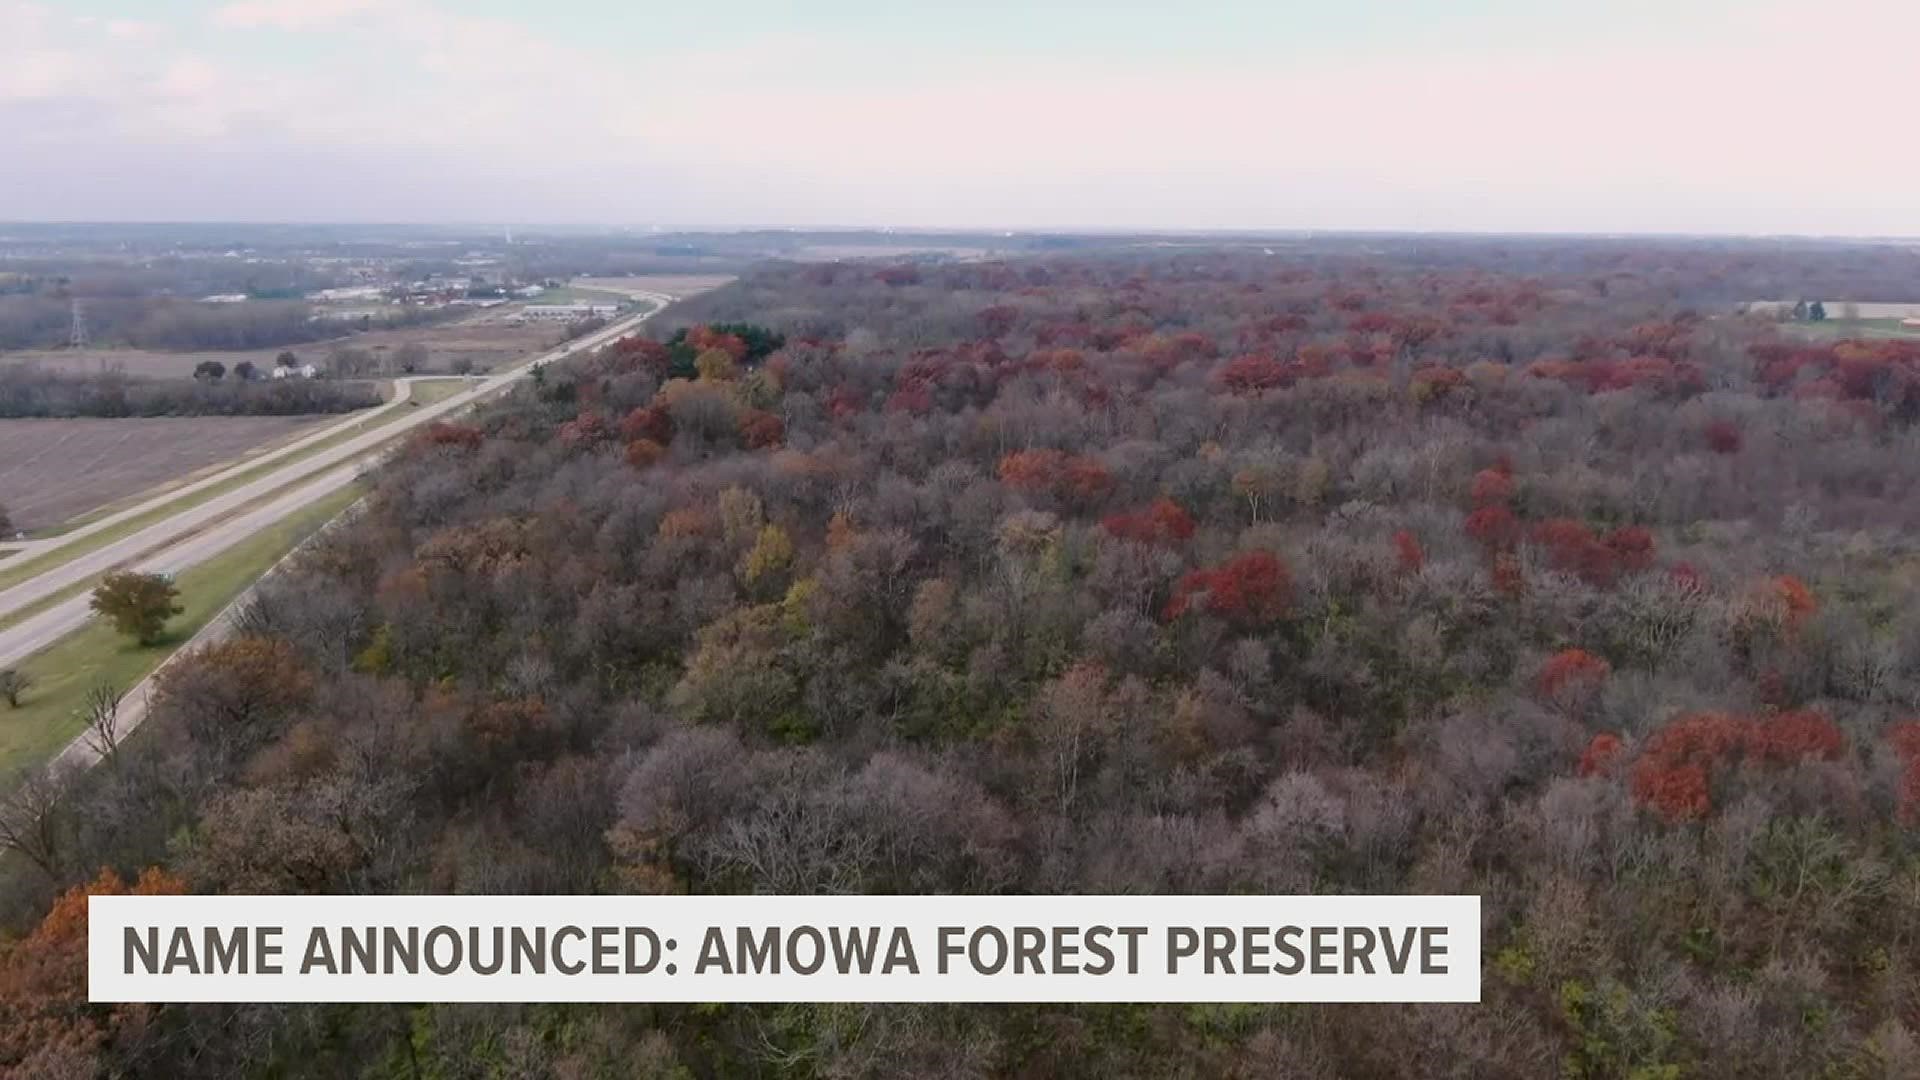 The new 180-acre East Moline park was named Amôwa Forest Preserve. "Amôwa" is the Sauk word for "bee."